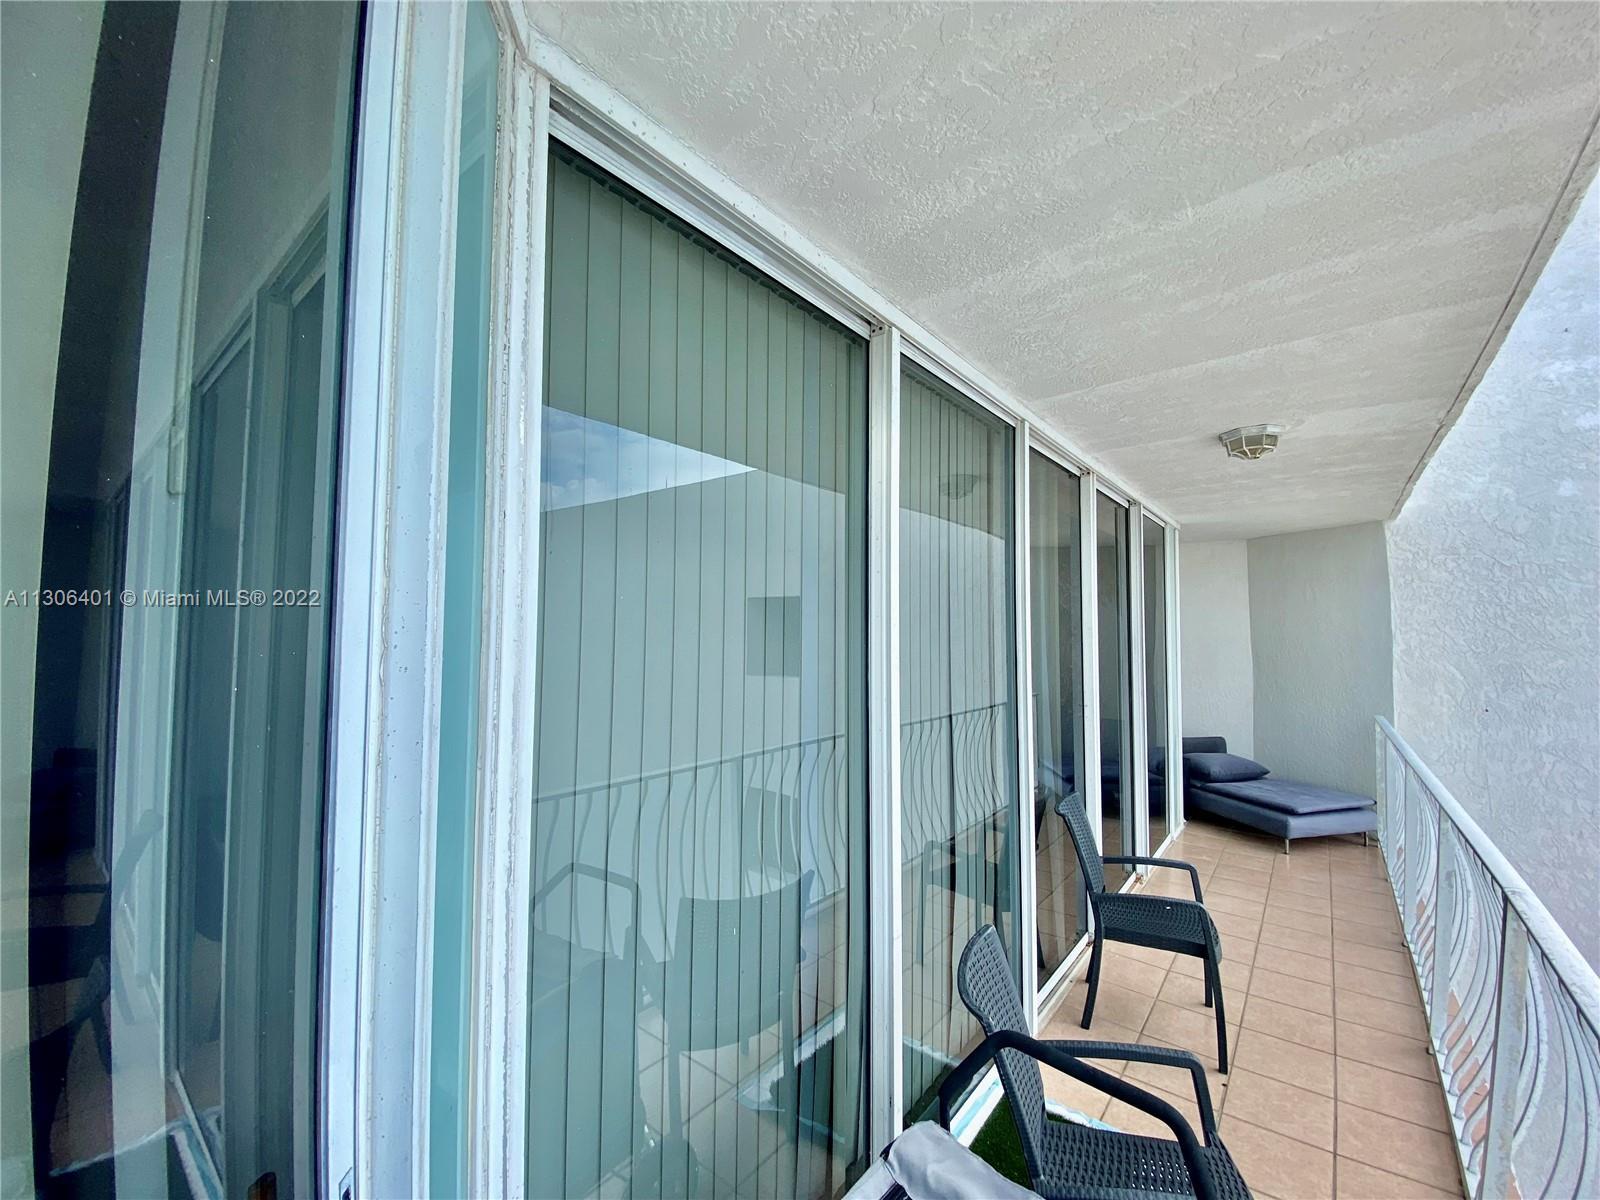 This unit has been priced to sell.  Enjoy views of Brickell, South Beach and Bay Areas from this Pen